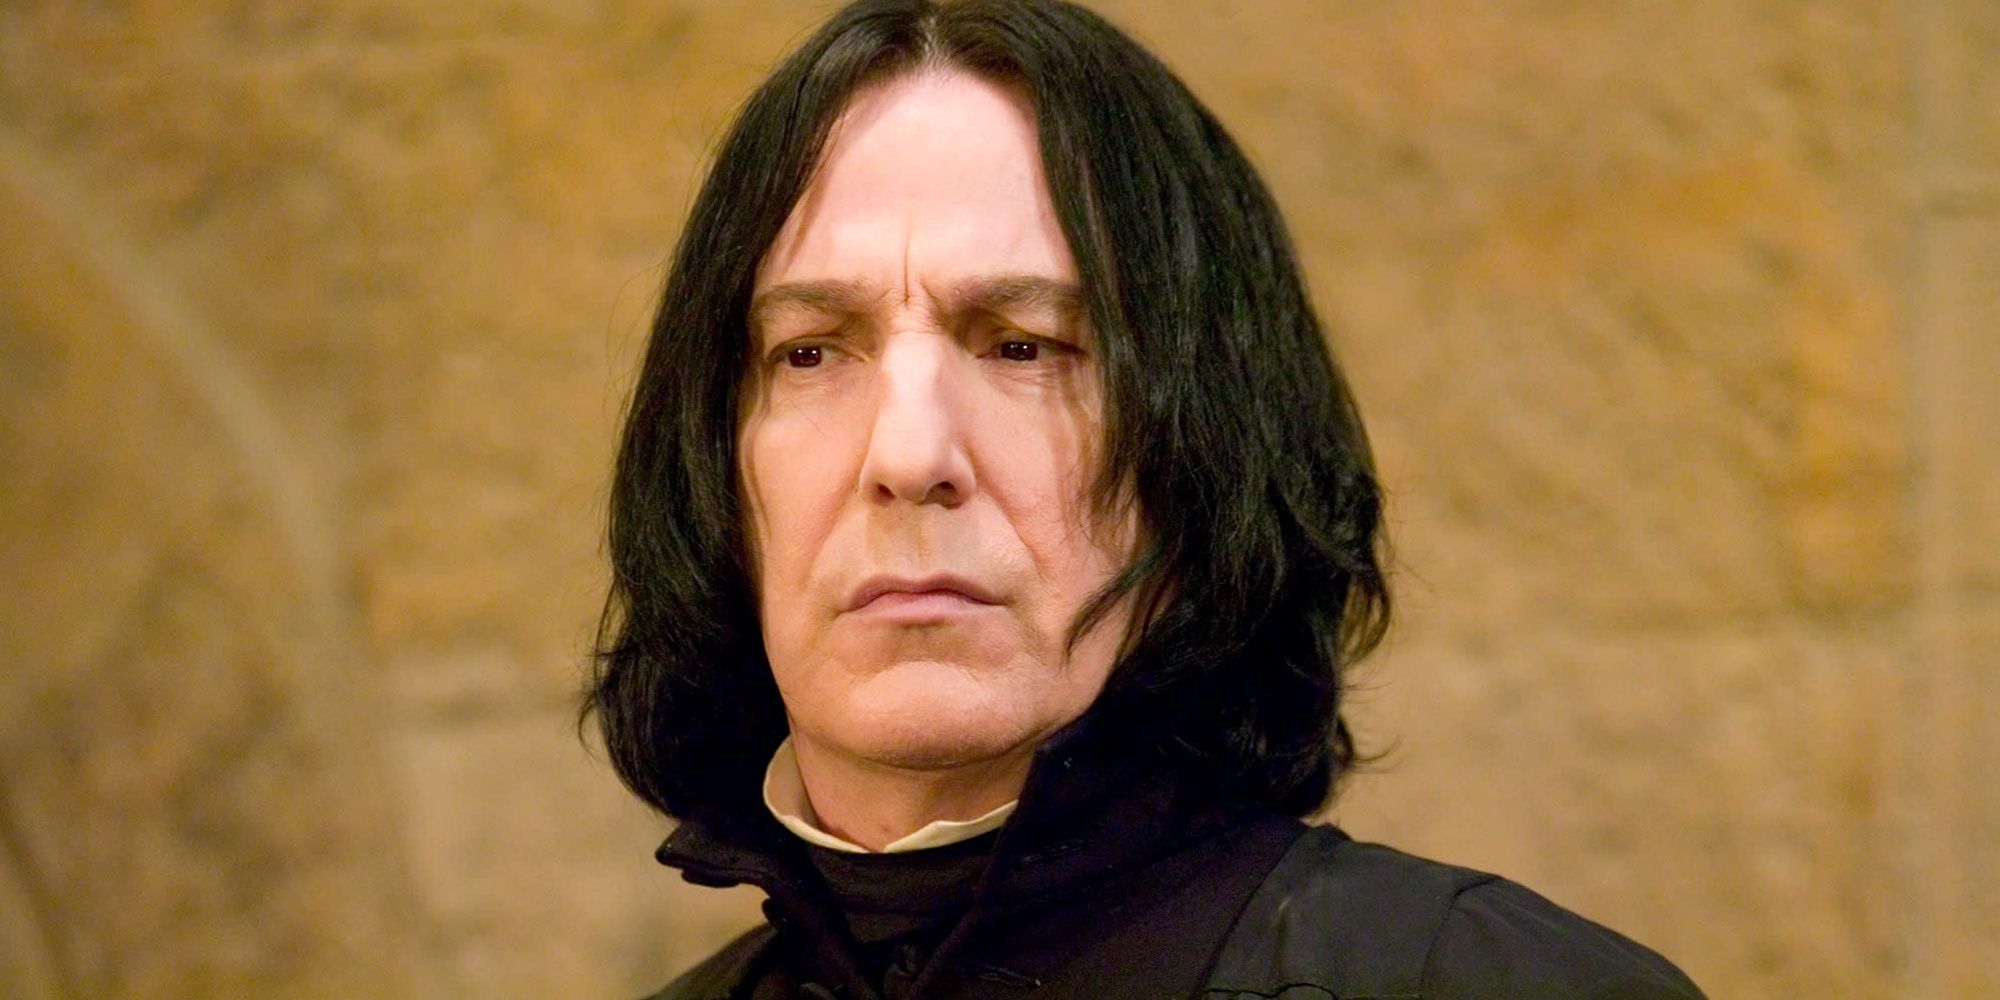 severus snape from harry potter dressed in his robes